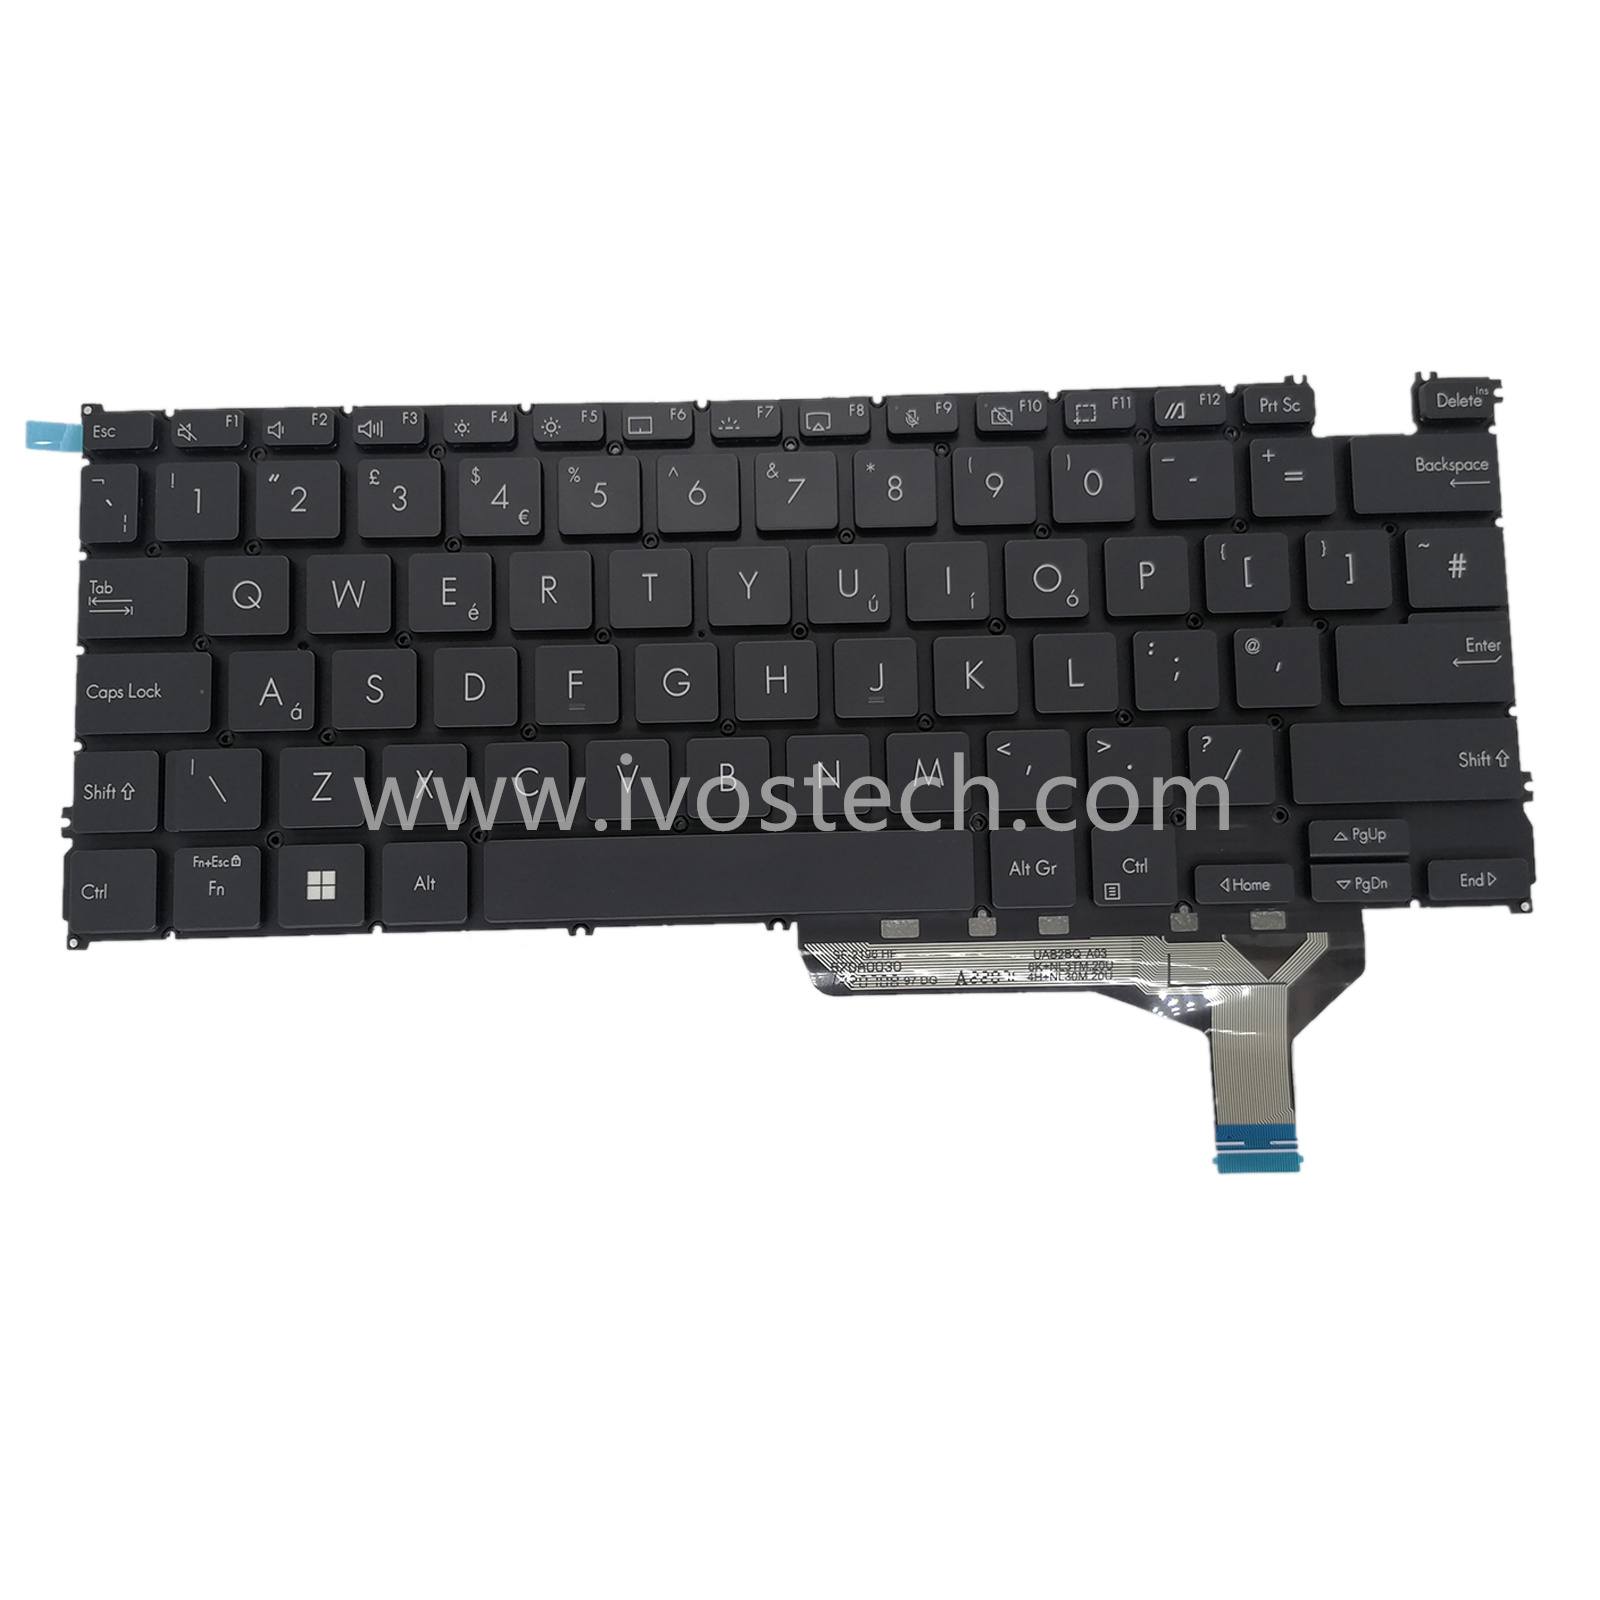 0KNB0-2921UK00 Laptop Replacement Keyboard with Backlit for ASUS UX3402 – UK Standard English